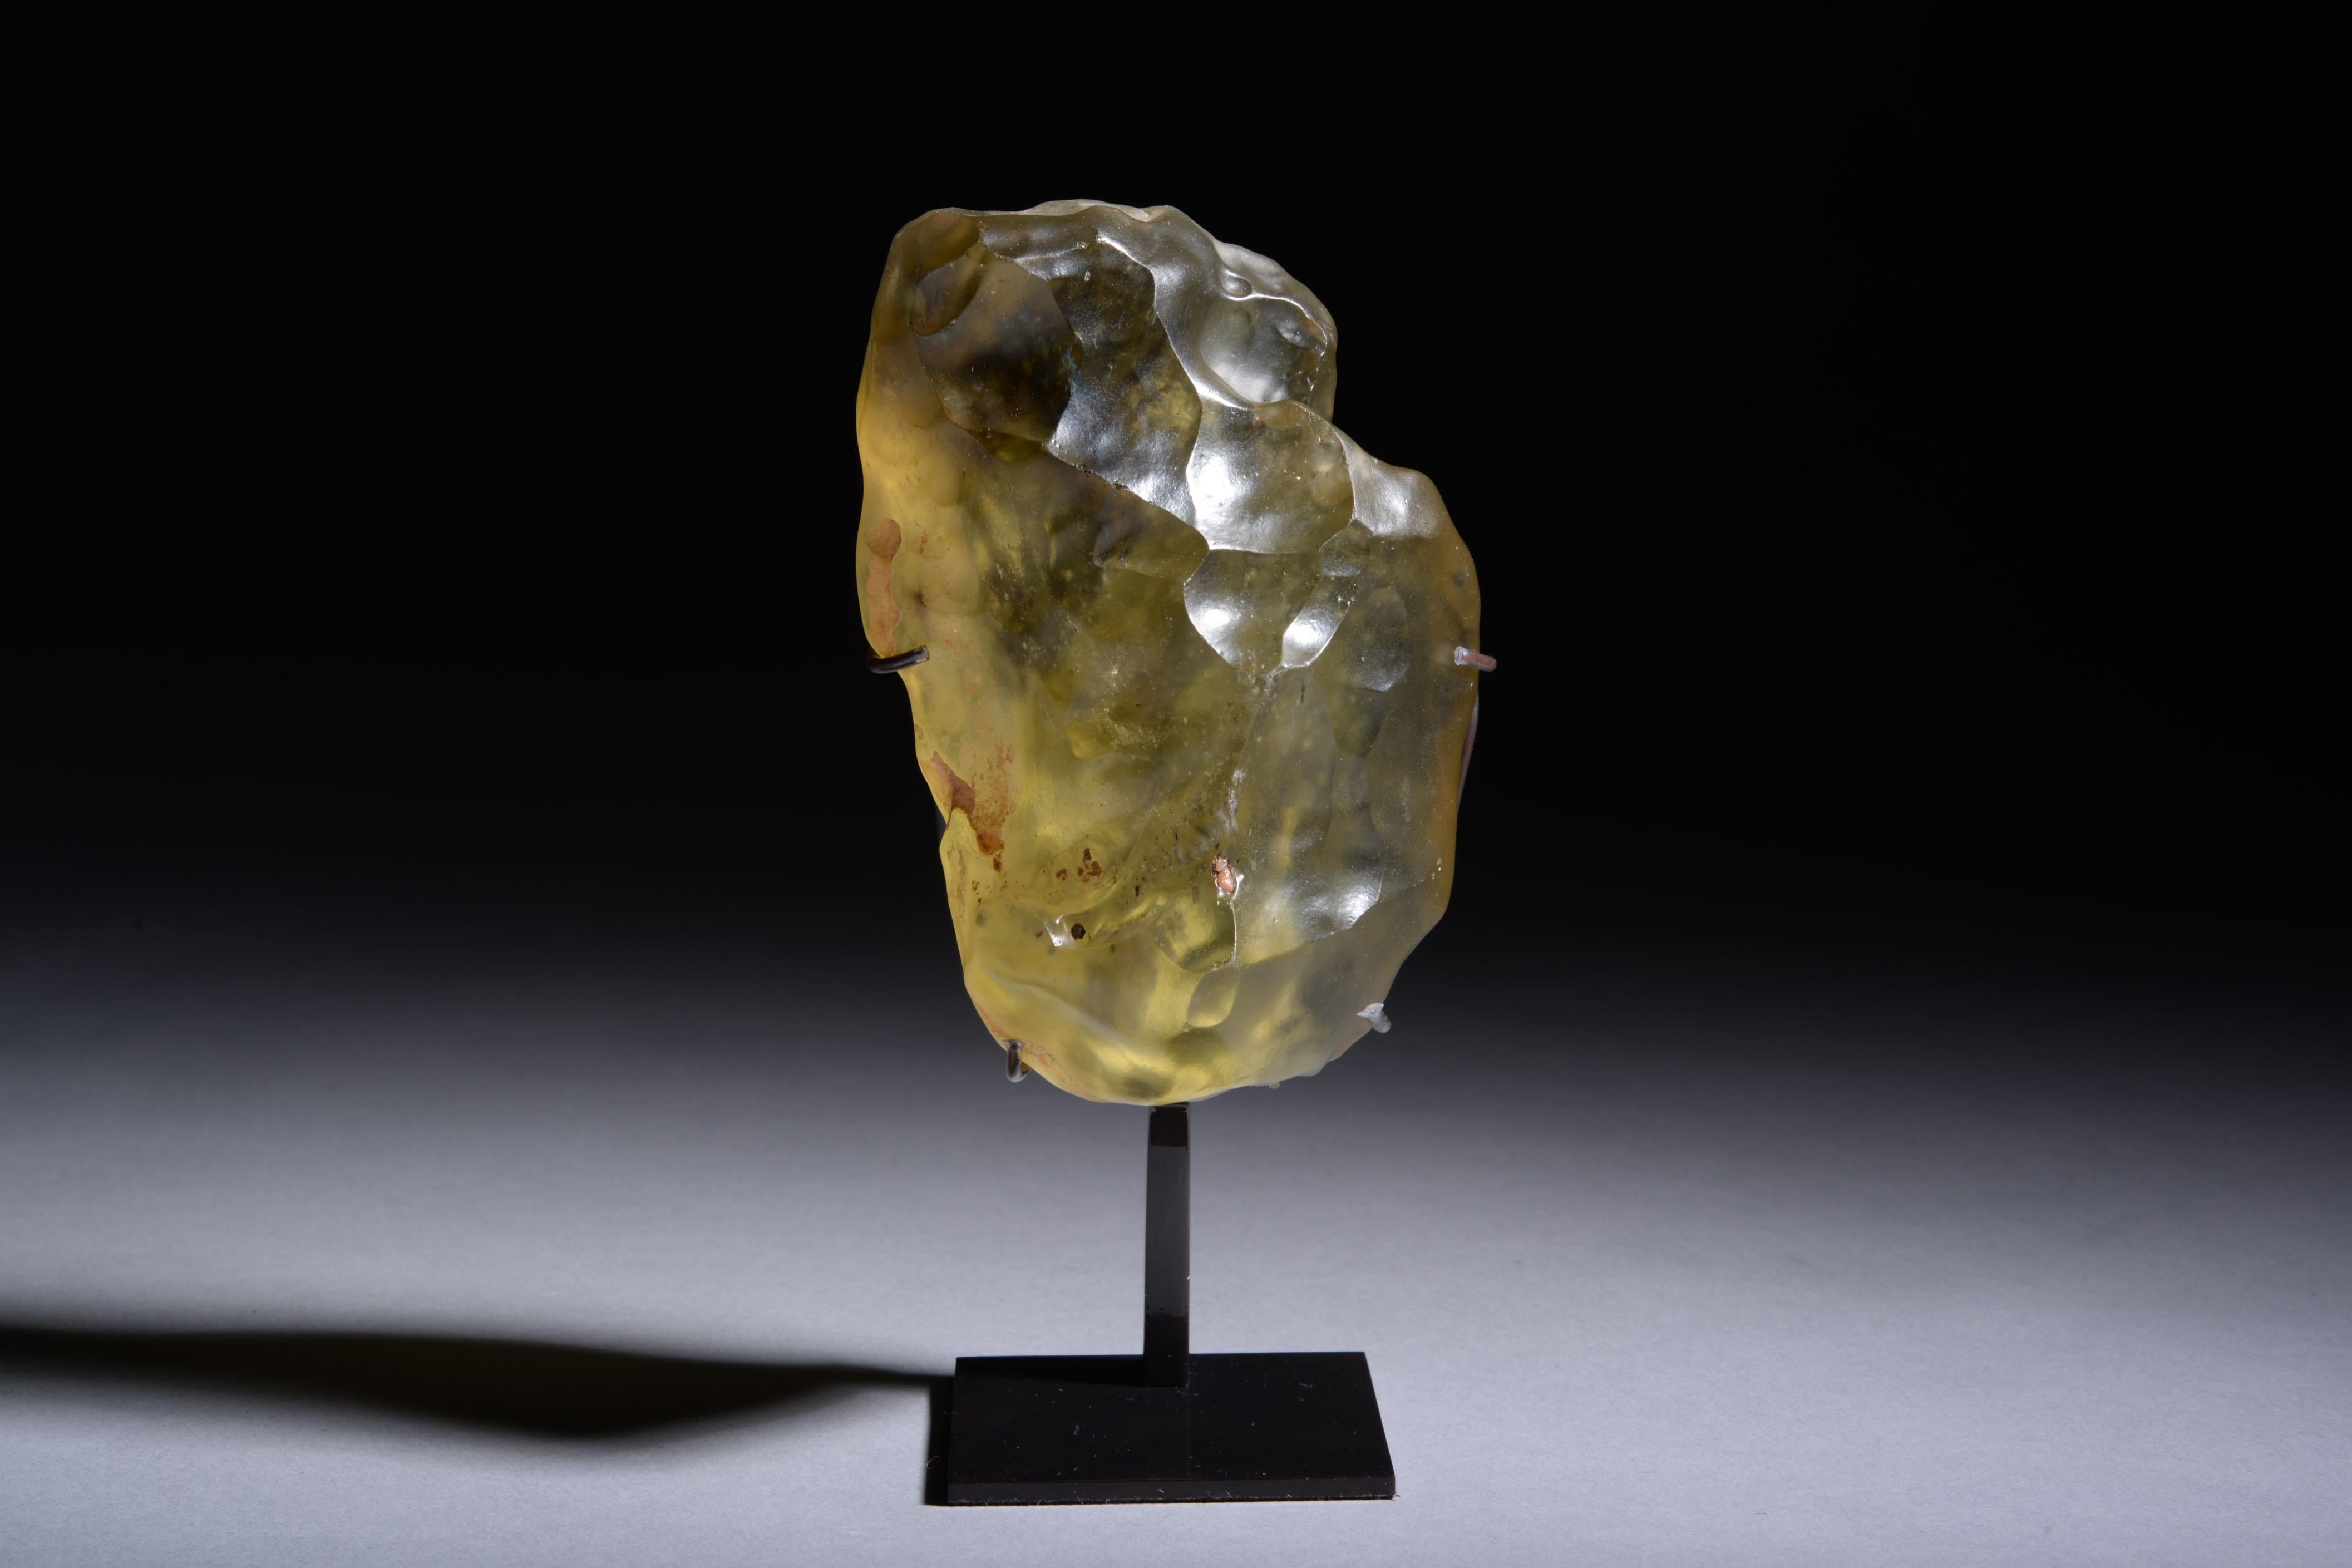 Libyan Desert Glass
Circa 29 Million y/o
Height: 9.5 cm

A beautiful, tactile piece of yellow glass, found between the high crested dunes of the Libyan Desert.  Libyan Desert Glass (LDG) long remained a mystery to the scientific community, with some